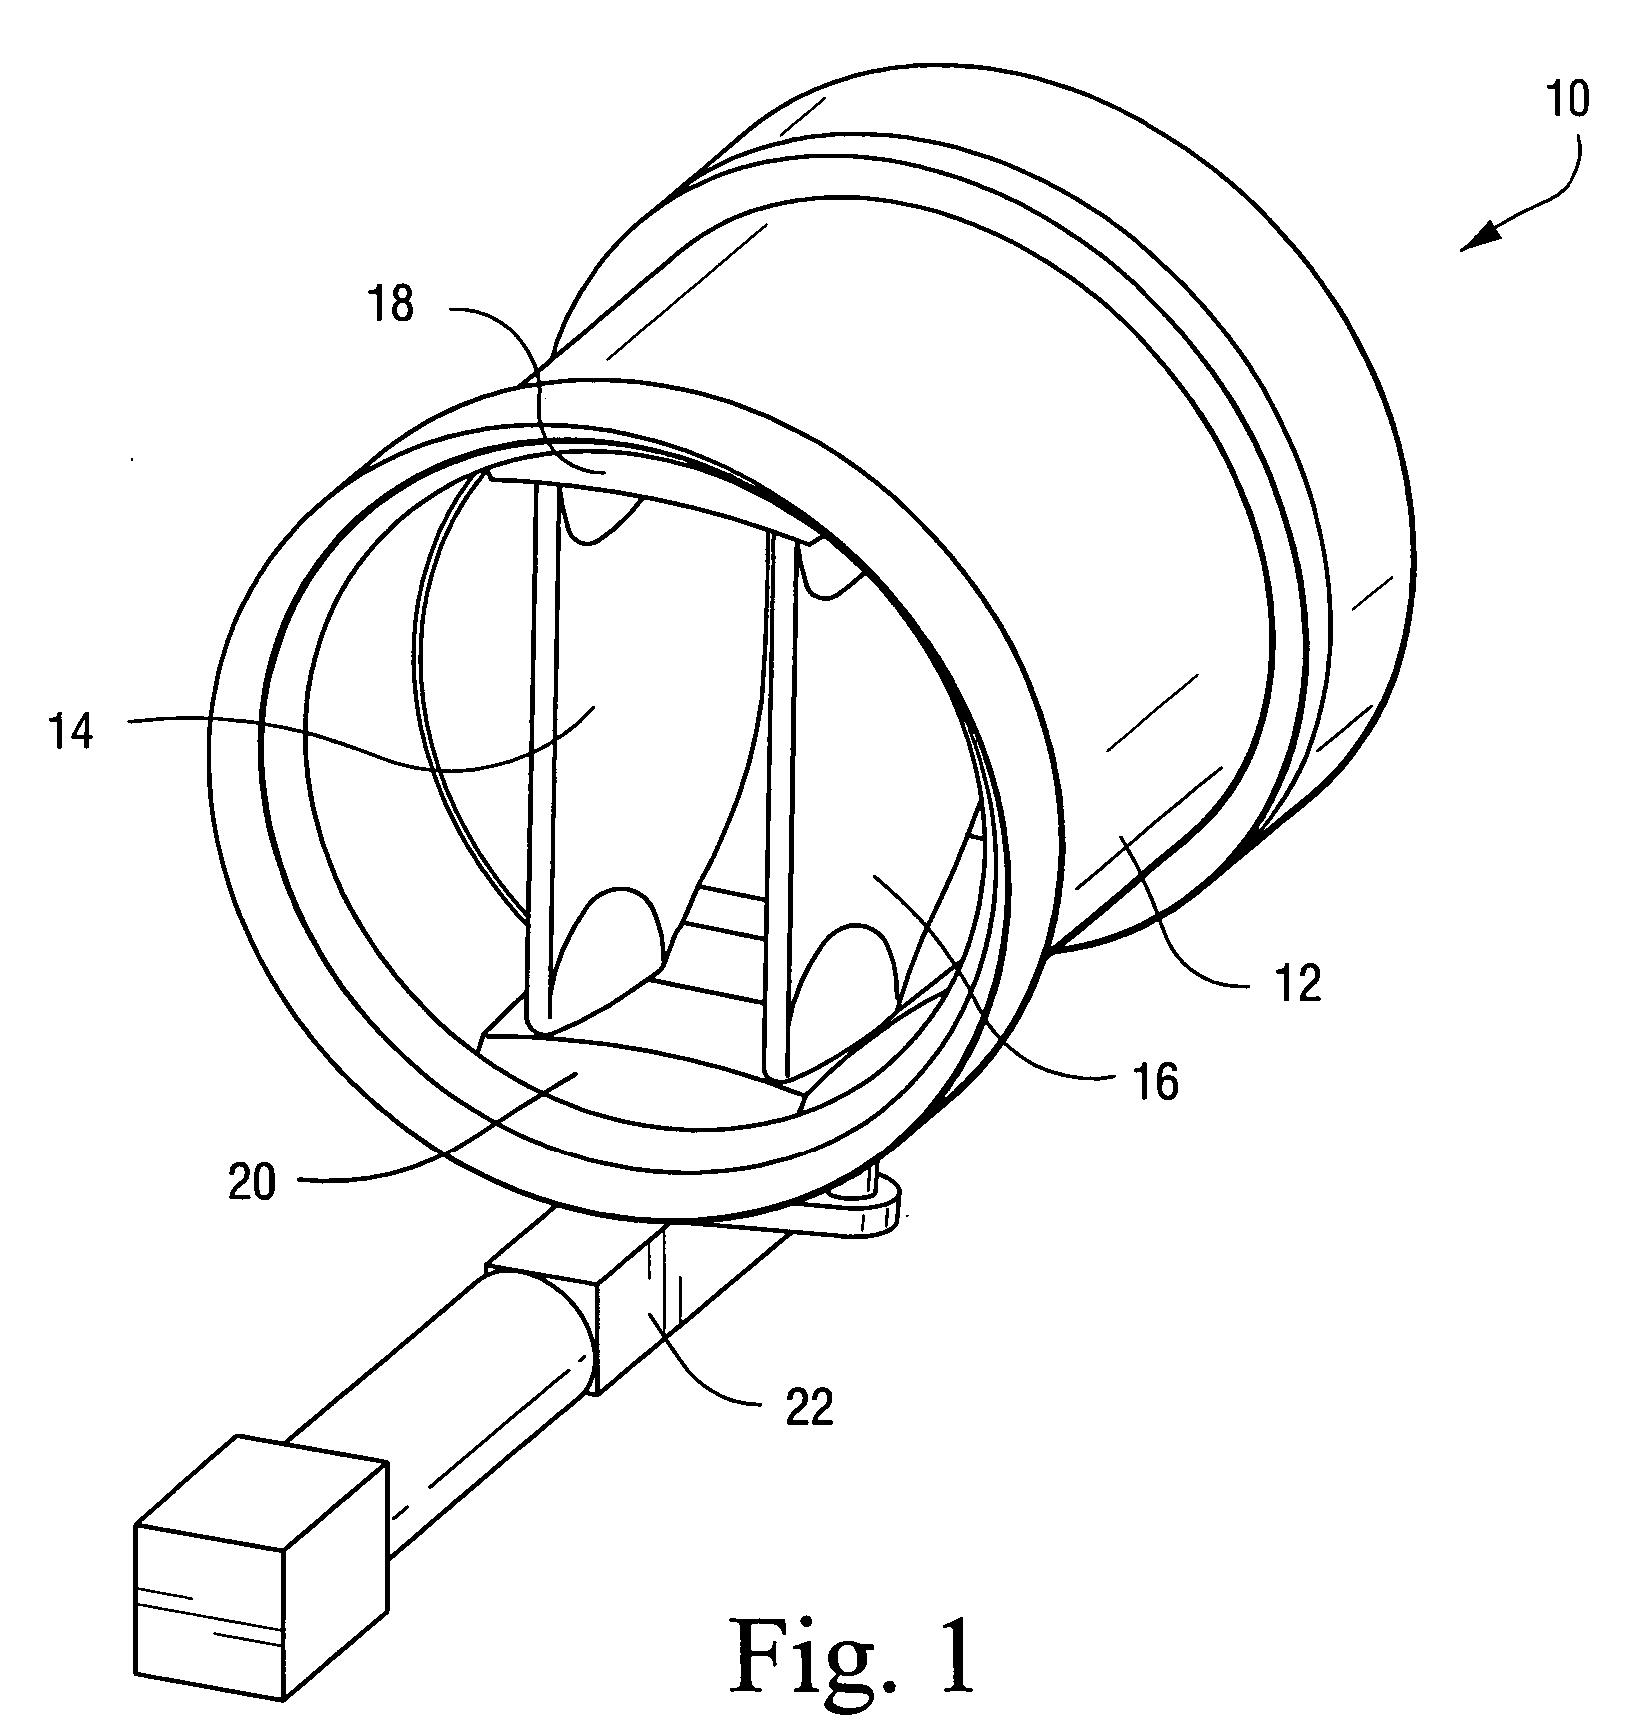 Nozzle assembly for rocket and ramjet applications